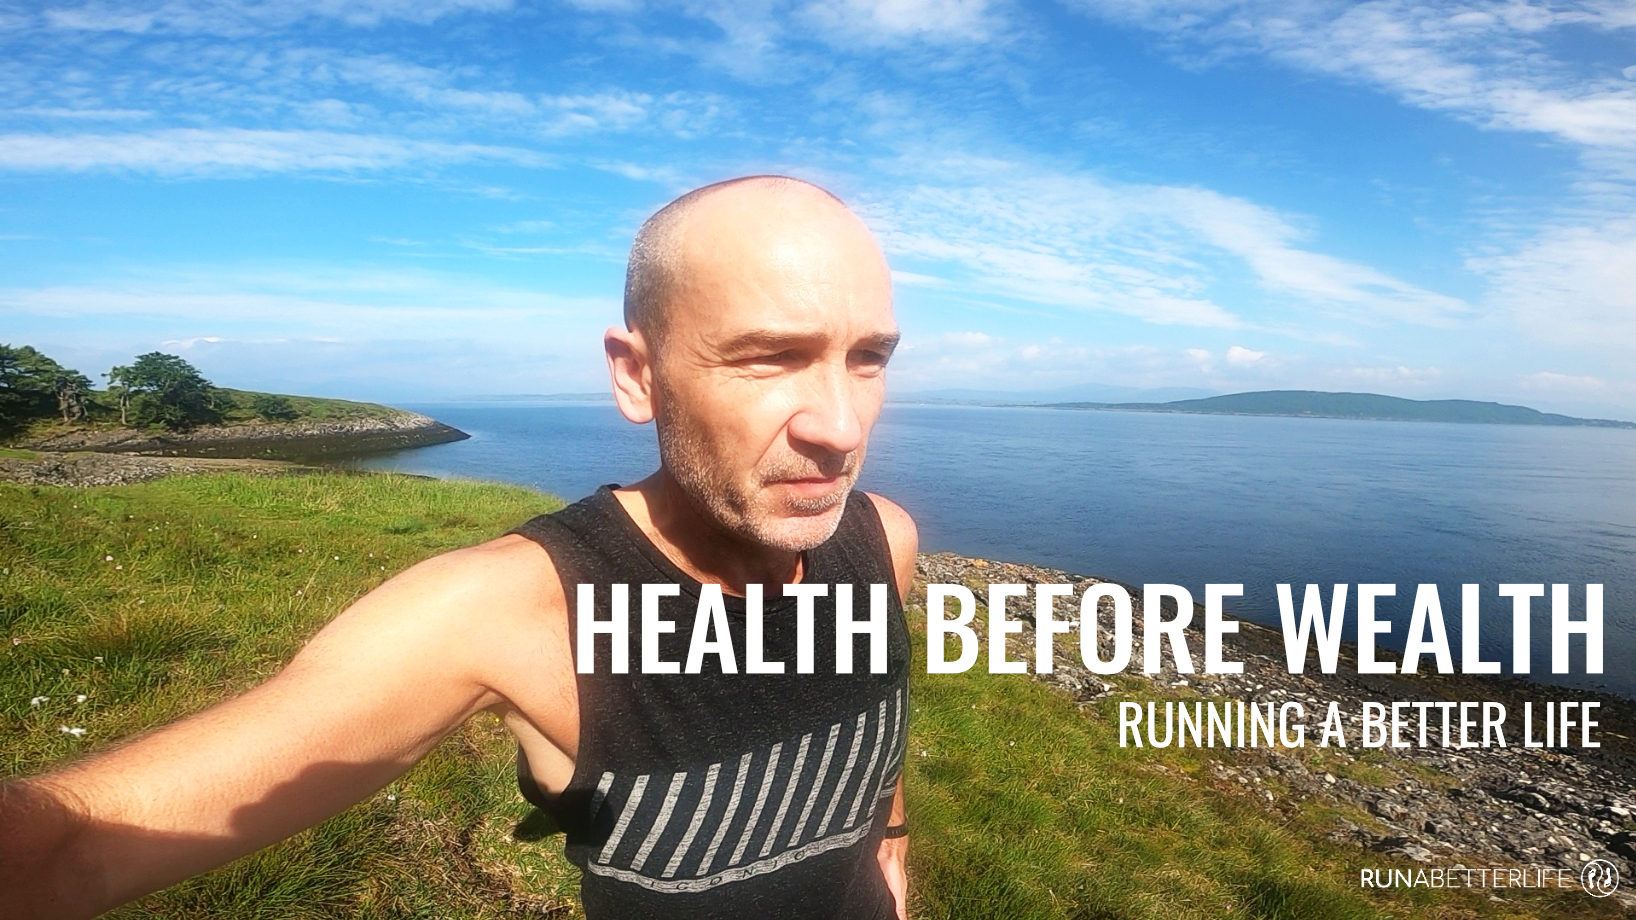 James of Run A Better Life on health before wealth